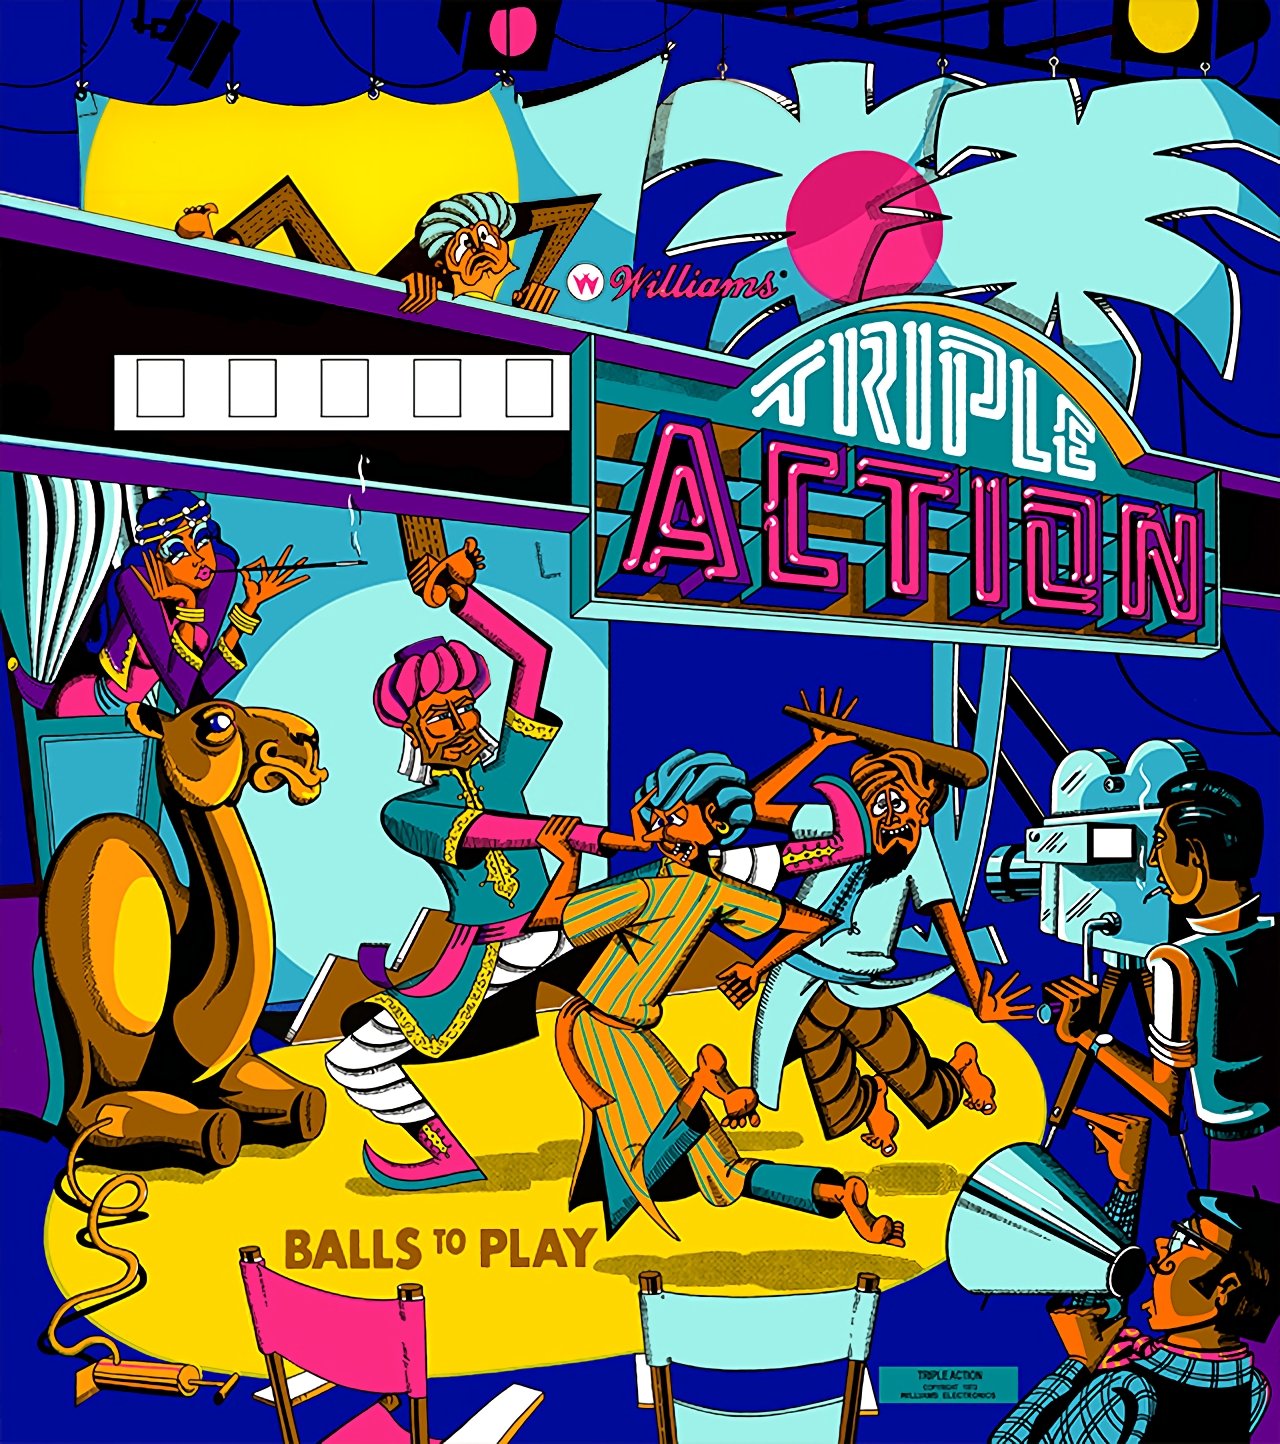 Triple Action (Williams, 1973) (IkeS)